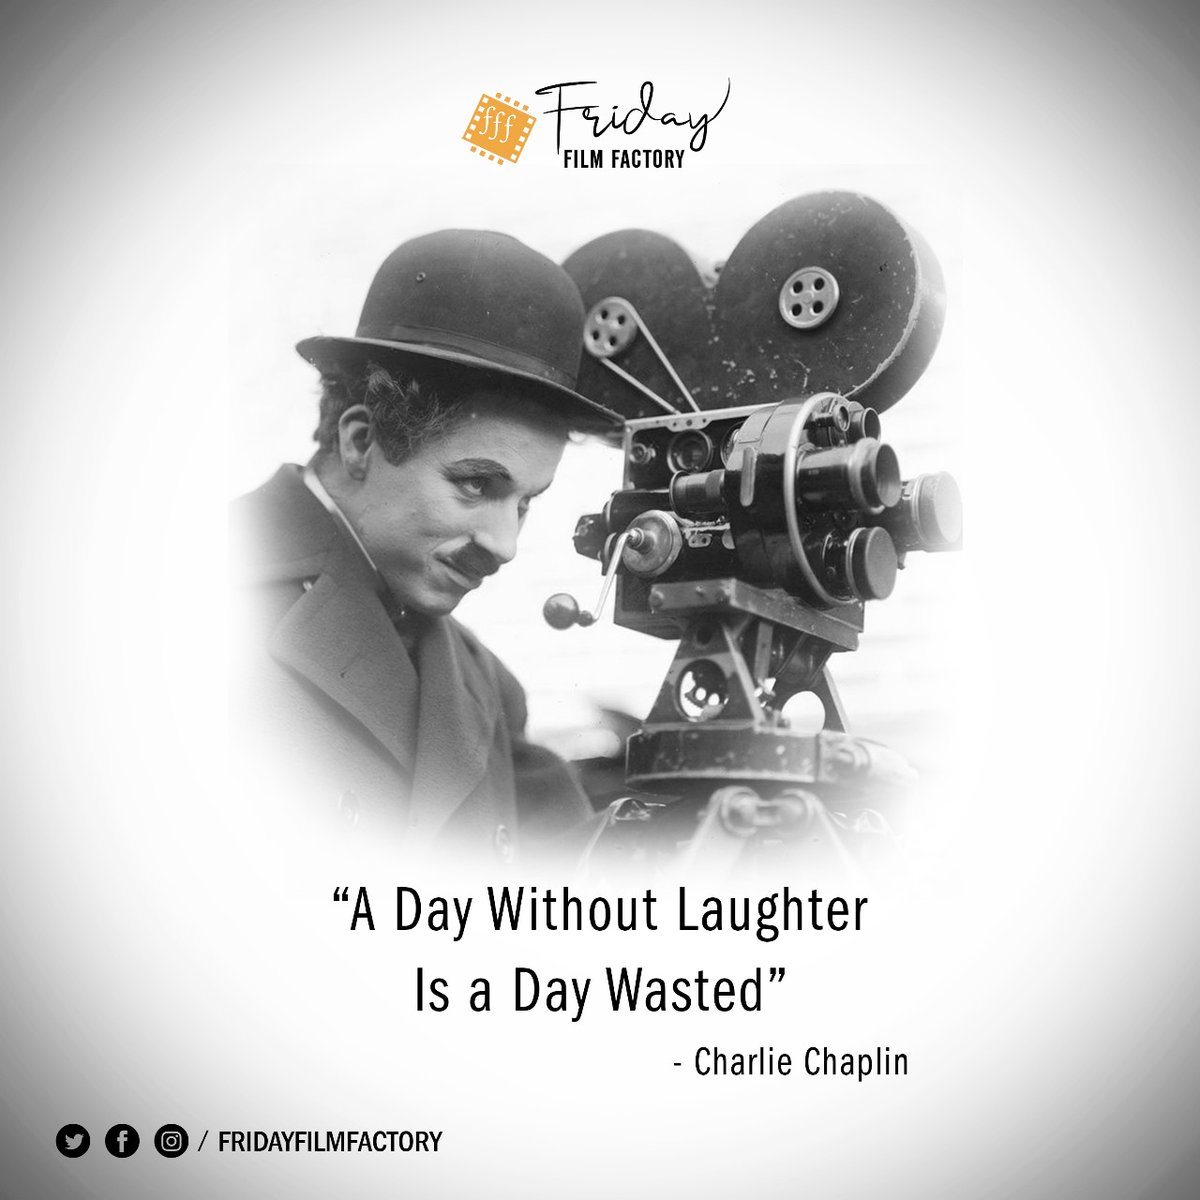 Today is the day when the greatest artist of all time was born: Charlie Chaplin. An artist who hid a lot of sorrows inside and made the world laugh. Let's remember him on this day.
#HBDcharliechaplin #Charliechaplin #movie #OTM #onceuponatimeinmadras #actorbharath #fff